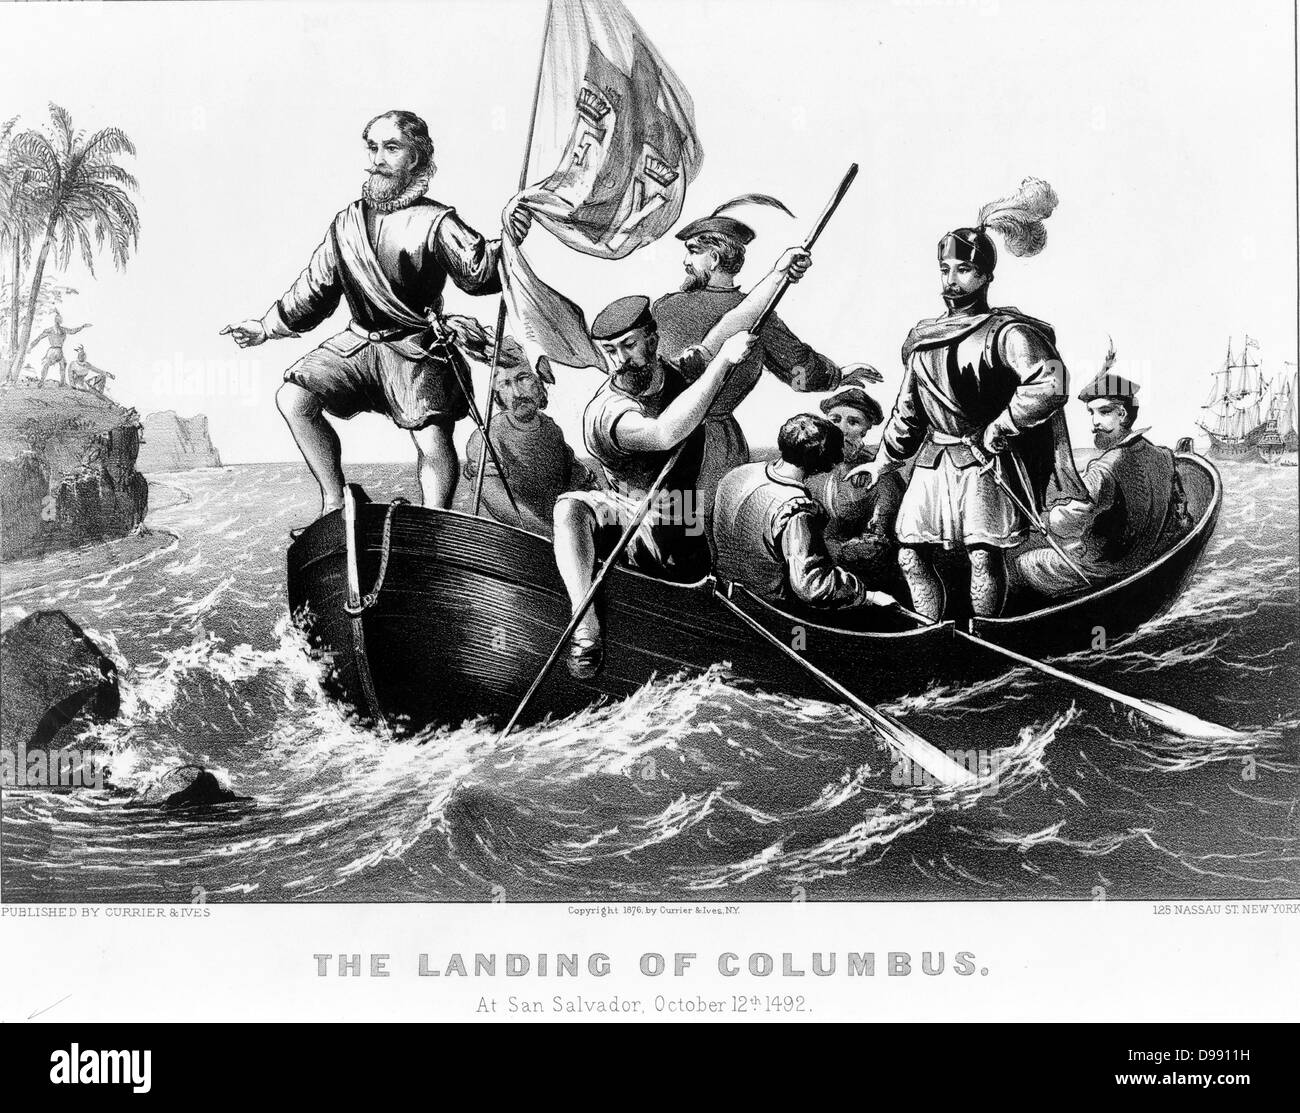 The landing of Columbus at San Salvador, October 12, 1492 Columbus standing in bow of boat holding Spanish flag. lithograph by Currier & Ives, c1876. Christopher Columbus (unknown; before 31 October 1451 – 20 May 1506) was an explorer, colonizer, and navigator, born in the Republic of Genoa, in what is today northwestern Italy.[2][3][4][5] Under the auspices of the Catholic Monarchs of Spain, he completed four voyages across the Atlantic Ocean that led to general European awareness of the American continents in the Western Hemisphere Stock Photo